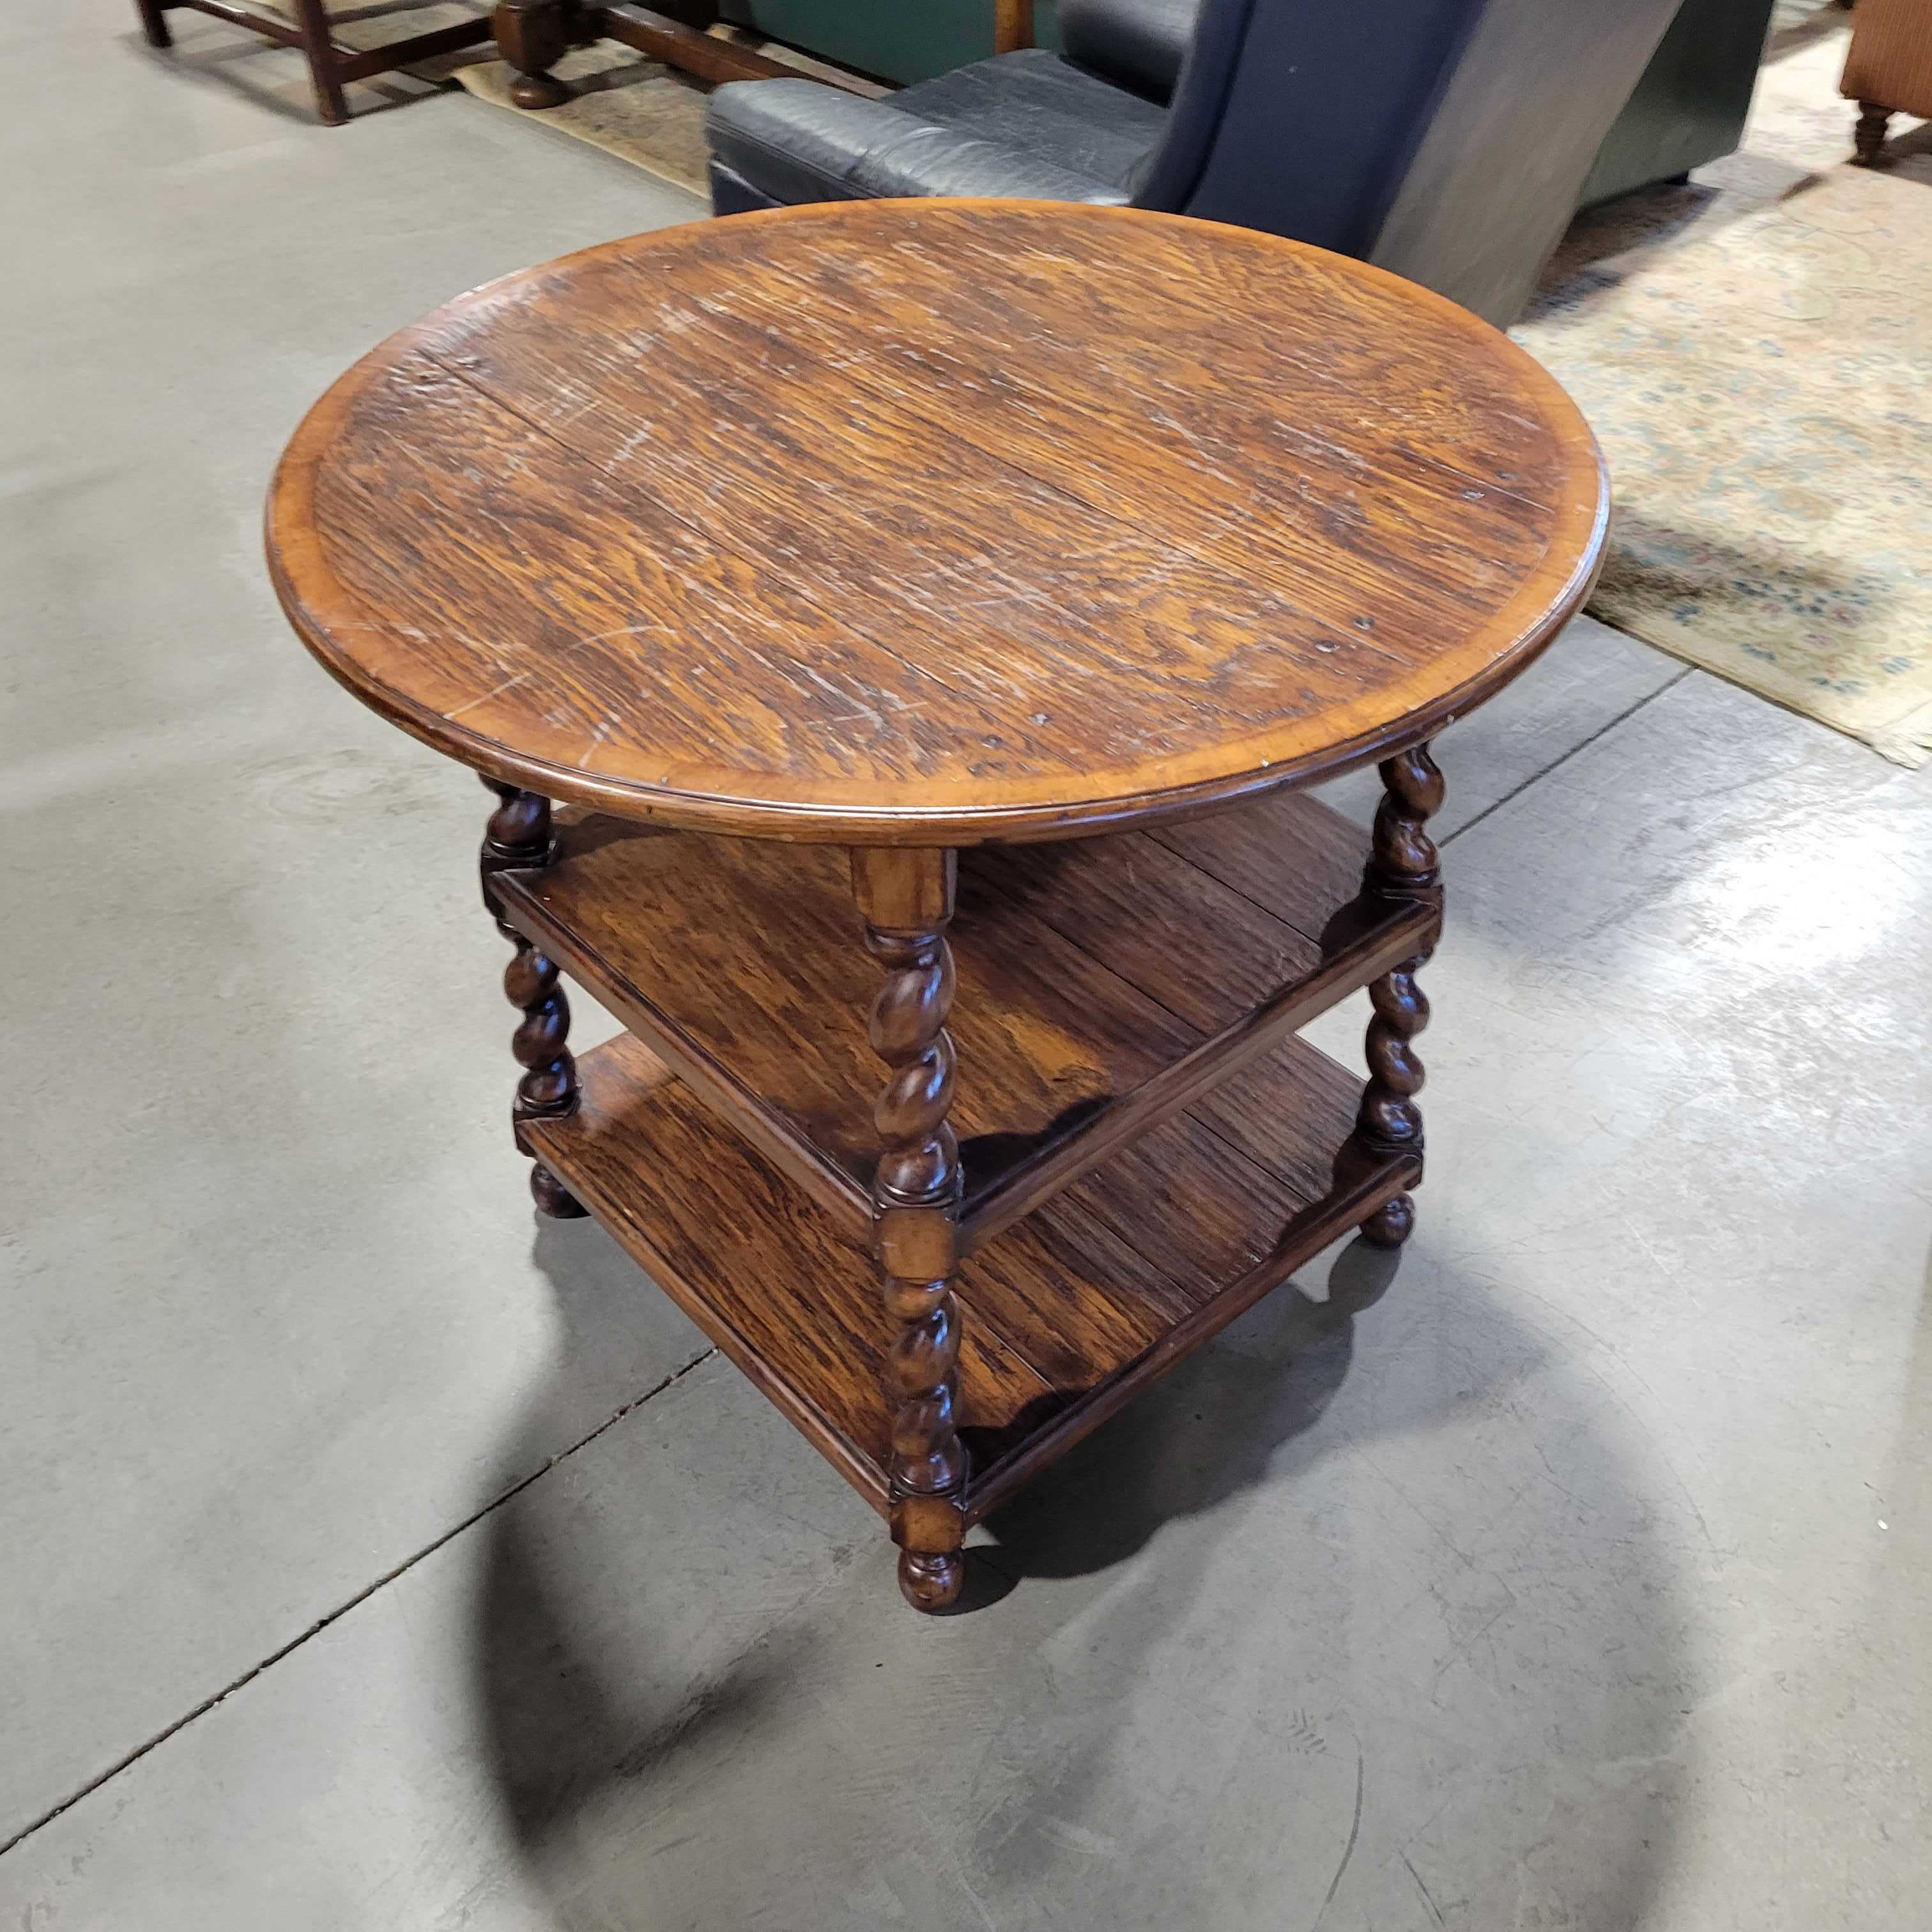 31" Diameter x 28" Round Carved Spiral Legs 3 Tiered Accent Table